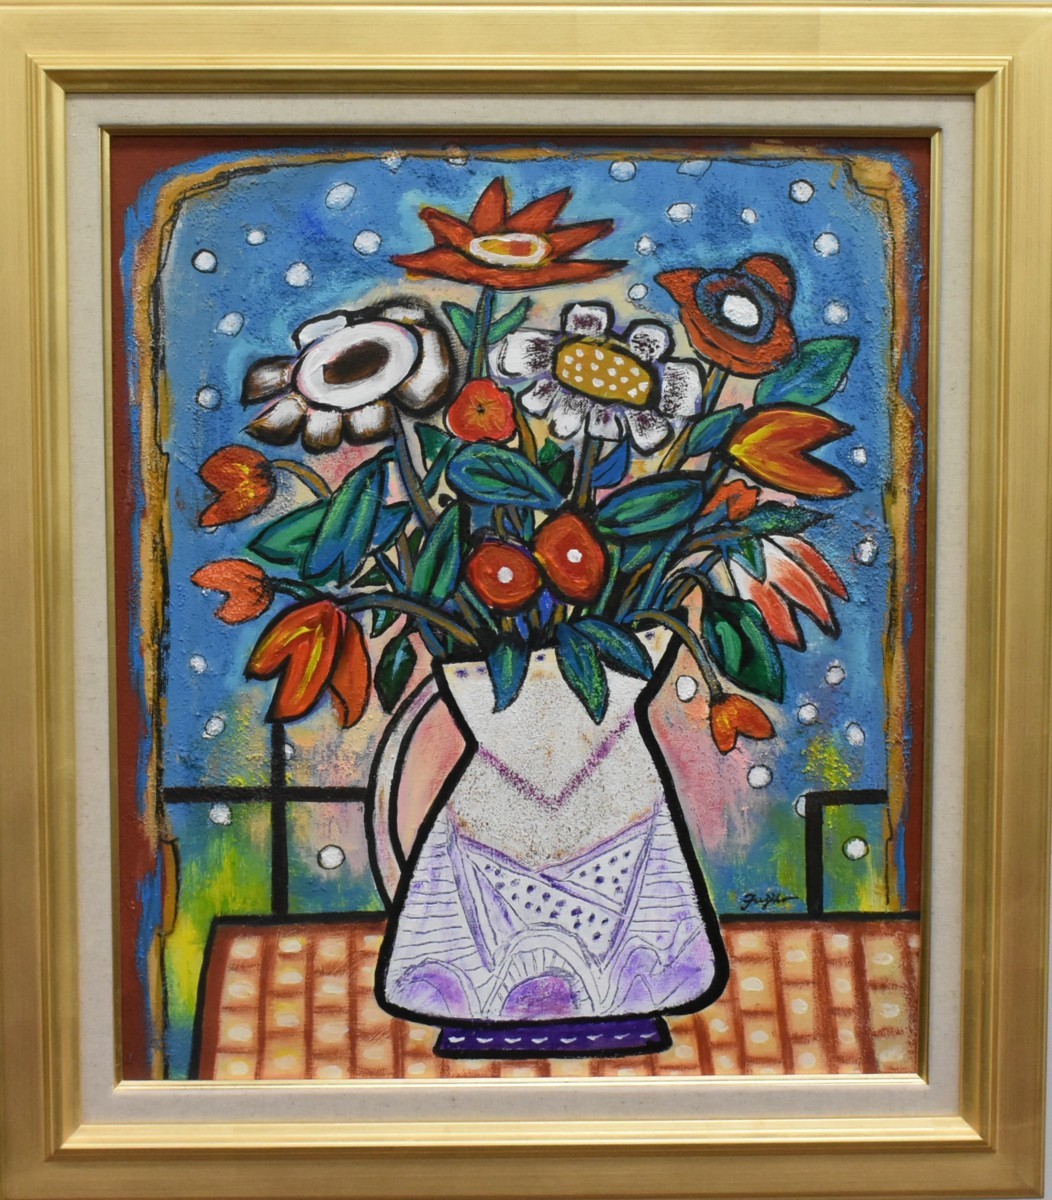 [Masamitsu Gallery] New oil painting work! Fujiko Shirai No. 10 Polka dot room and bouquet [5000 items on sale! You can find your favorite work], painting, oil painting, still life painting